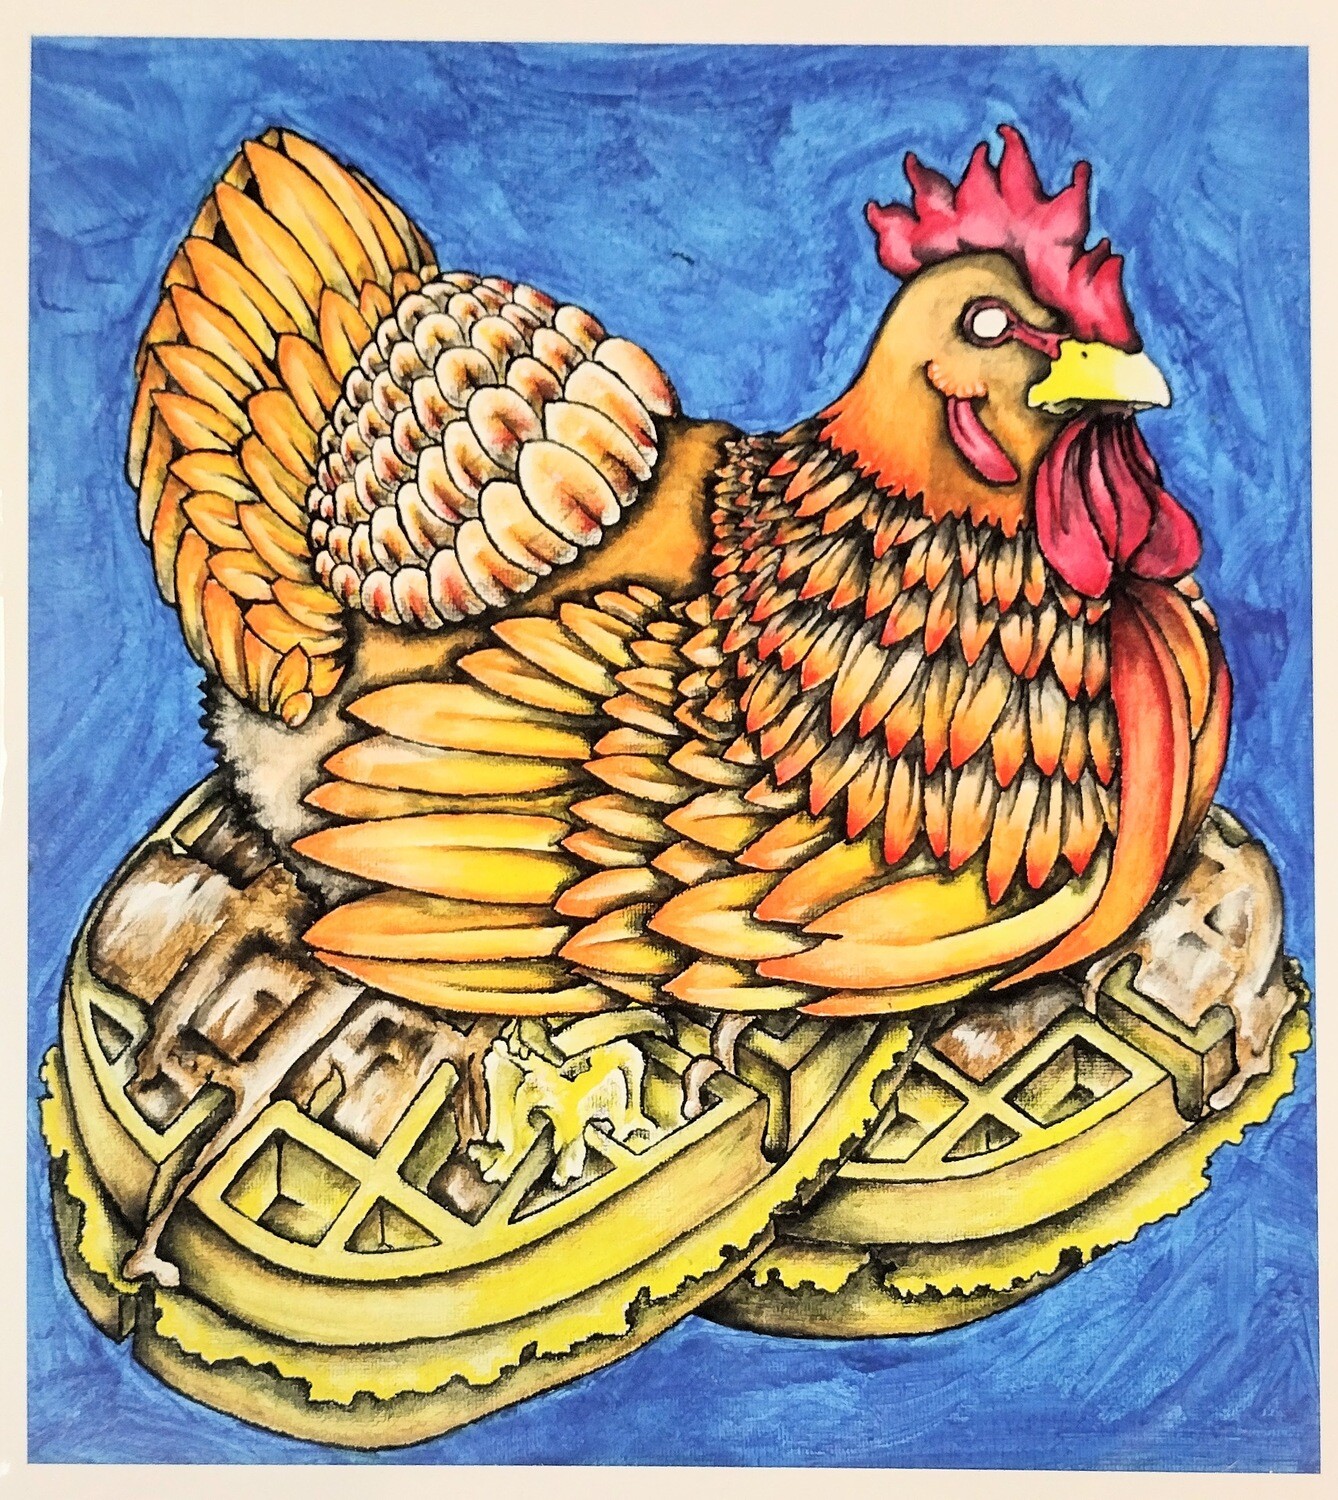 Chicken and Waffles - Print by Honeycomb Winnie